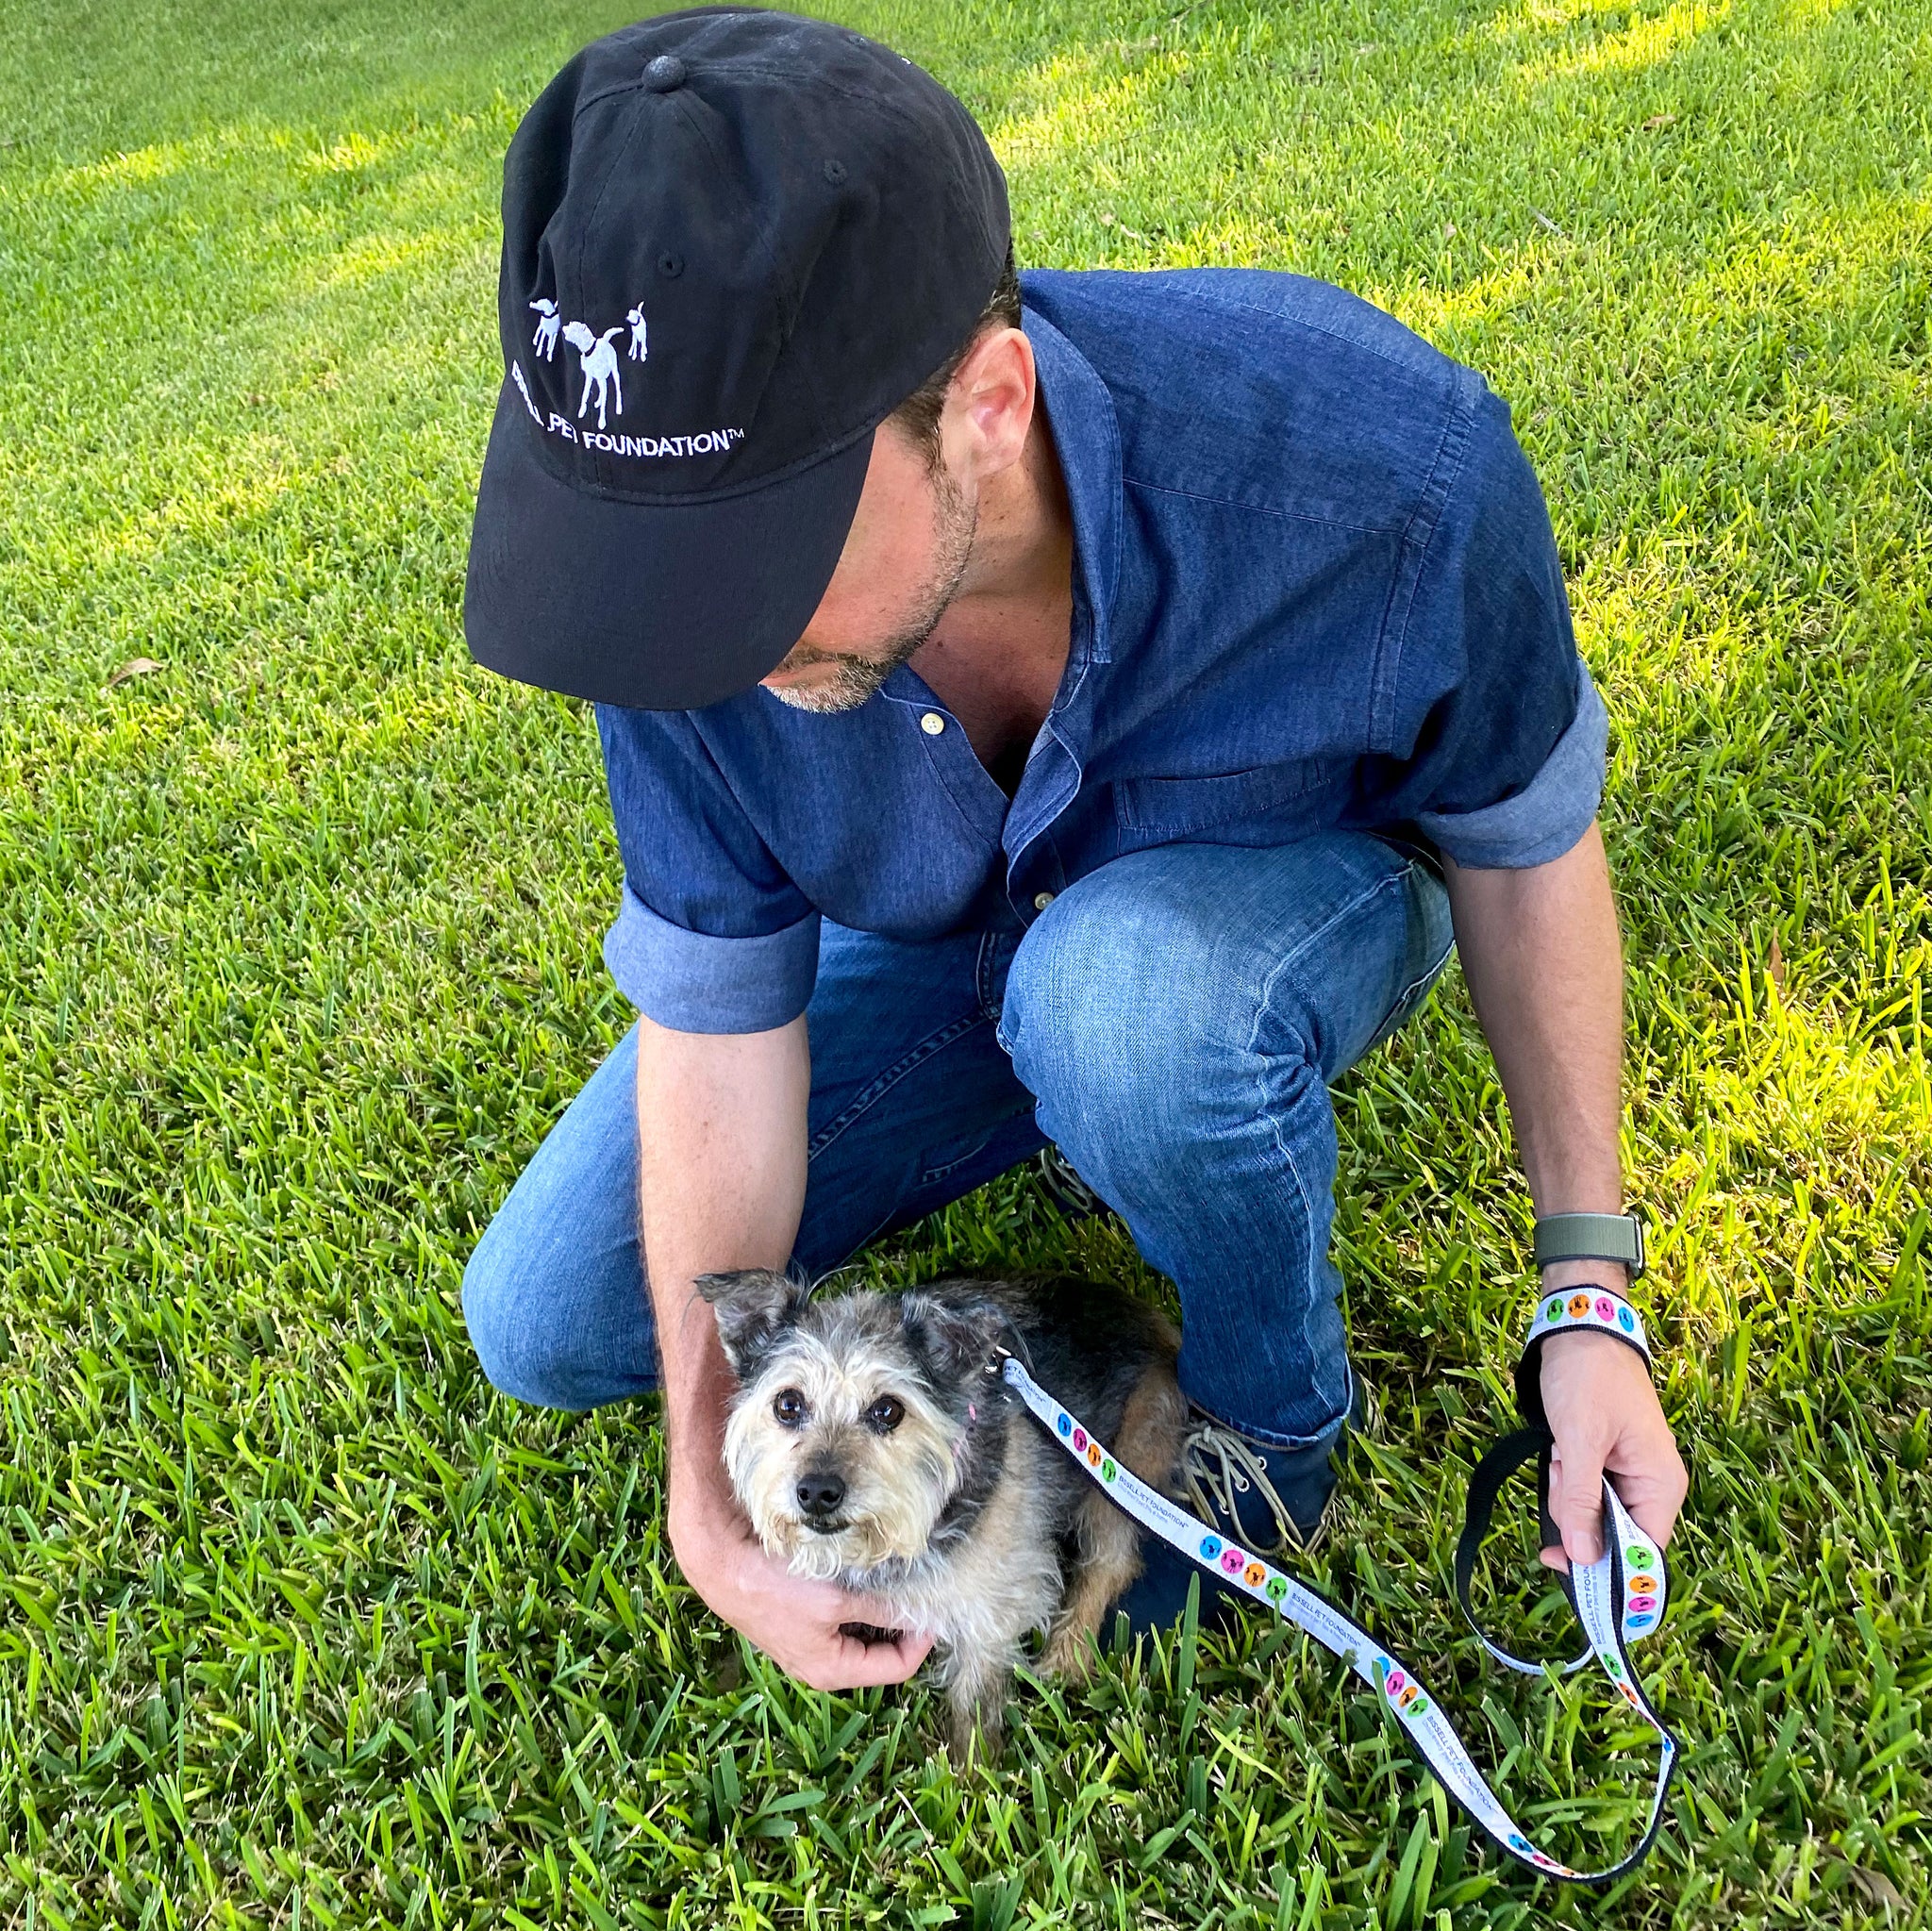 Man wearing BISSELL Pet Foundation Cap with dog wearing BISSELL Pet Foundation Dog Leash